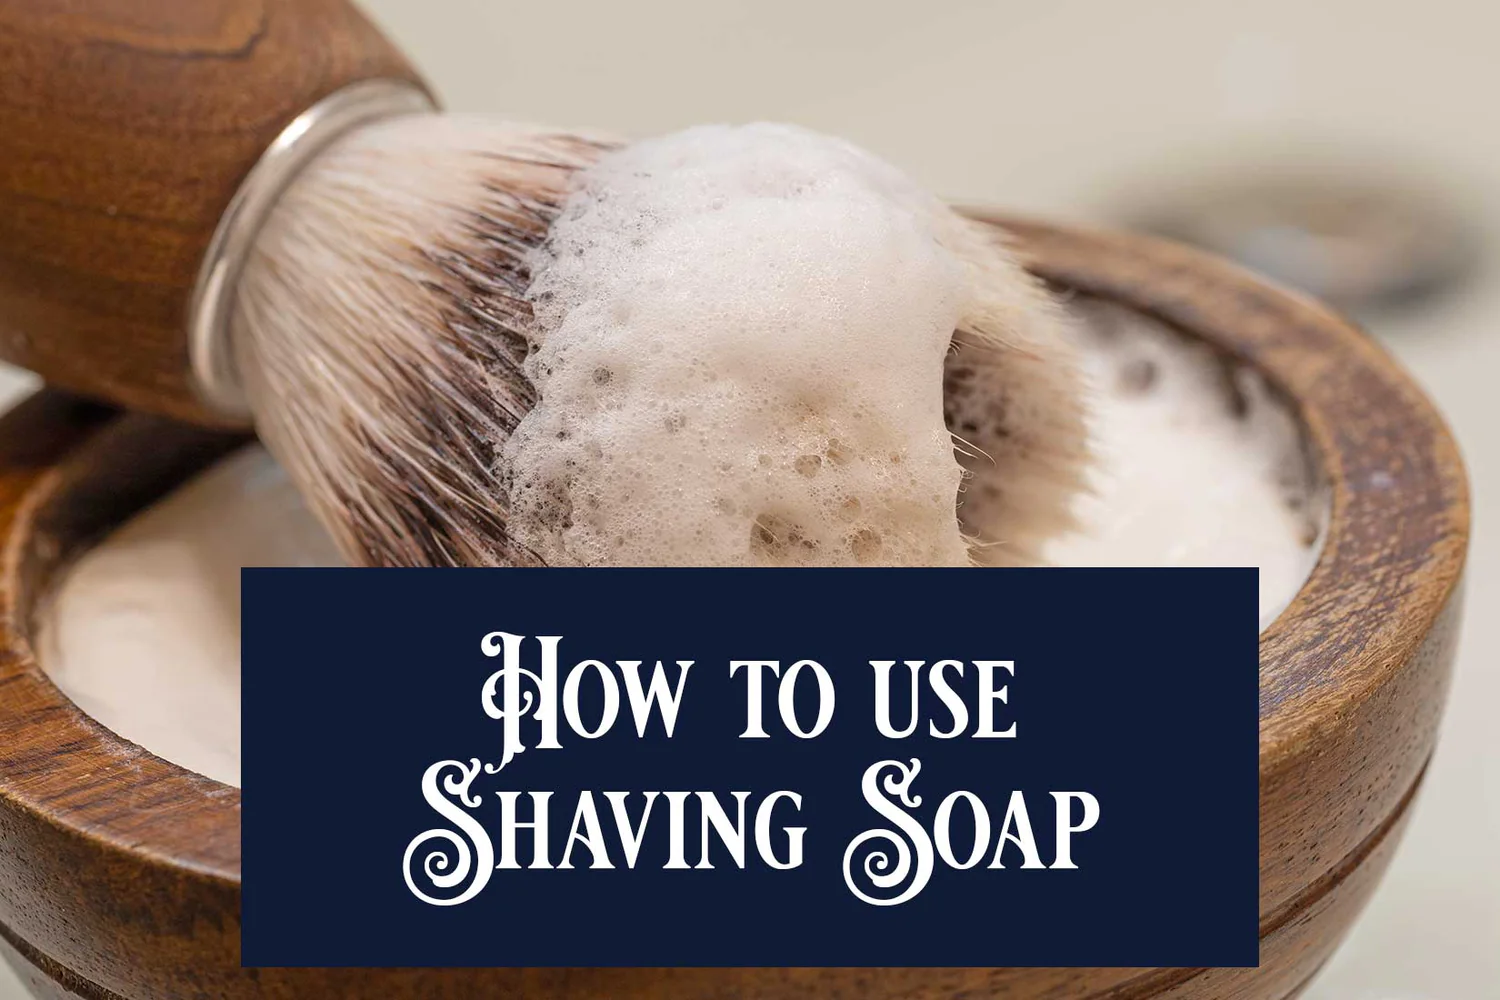 How-to-use-shaving-soap